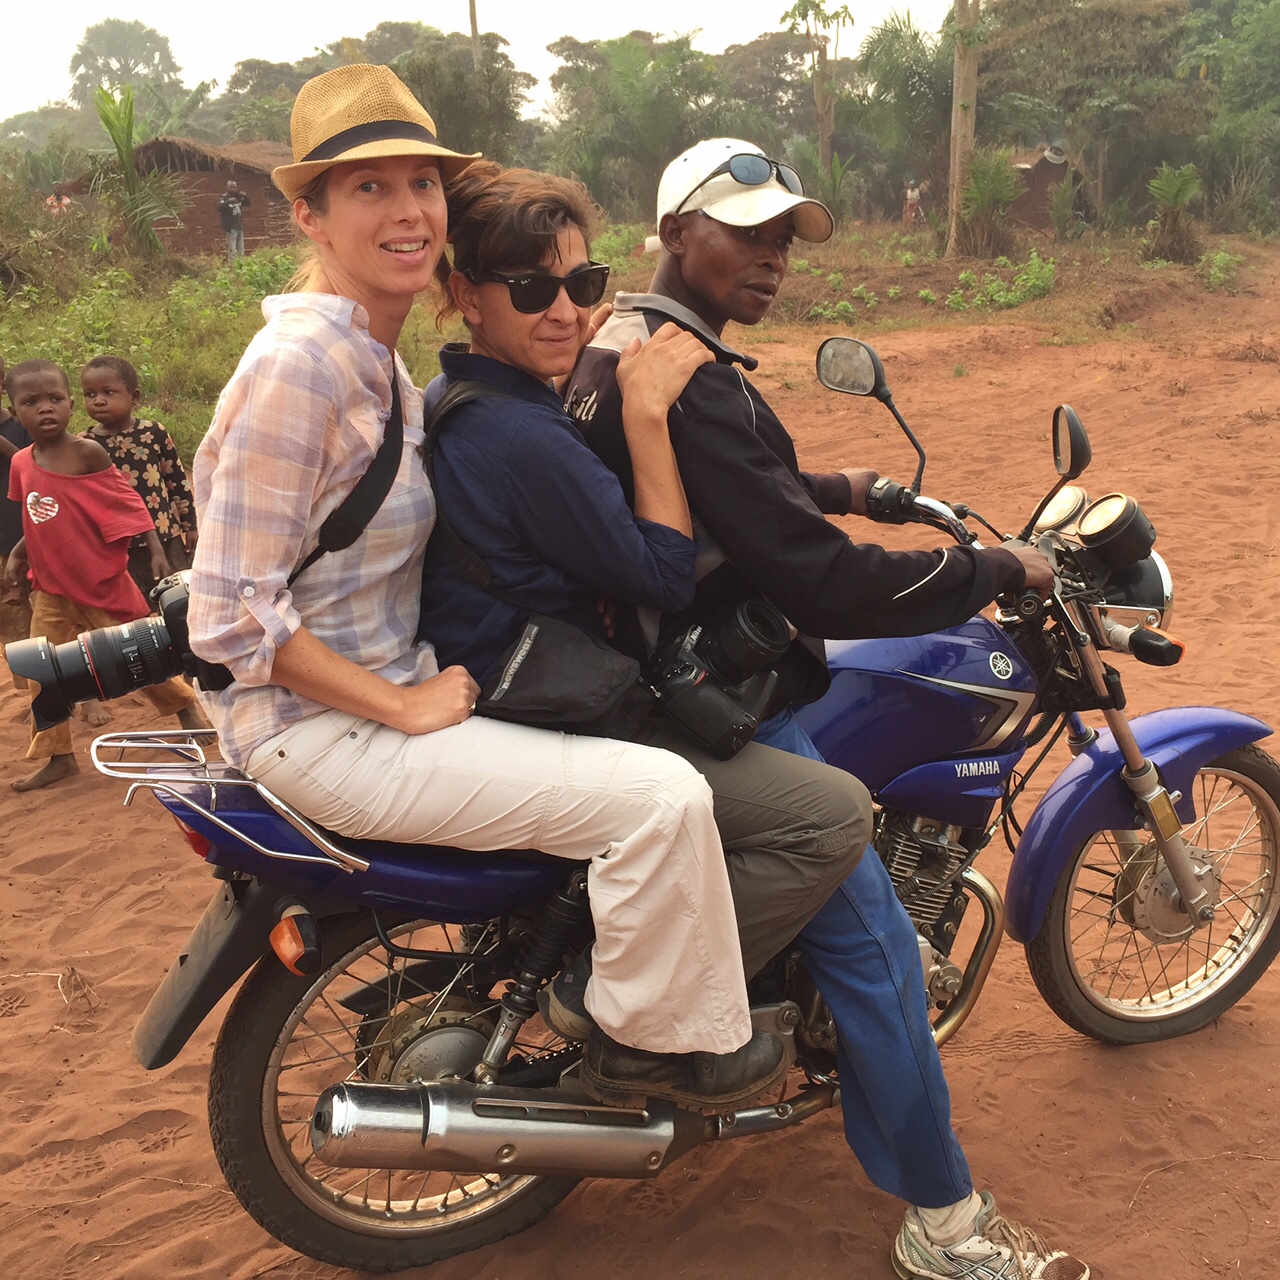 TIME’s Africa Bureau Chief Aryn Baker and photographer Lynsey Addario on assignment for TIME in the Democratic Republic of Congo. (<a href="https://instagram.com/arynebaker/" target="_blank" title="@arynebaker">@arynebaker</a>)